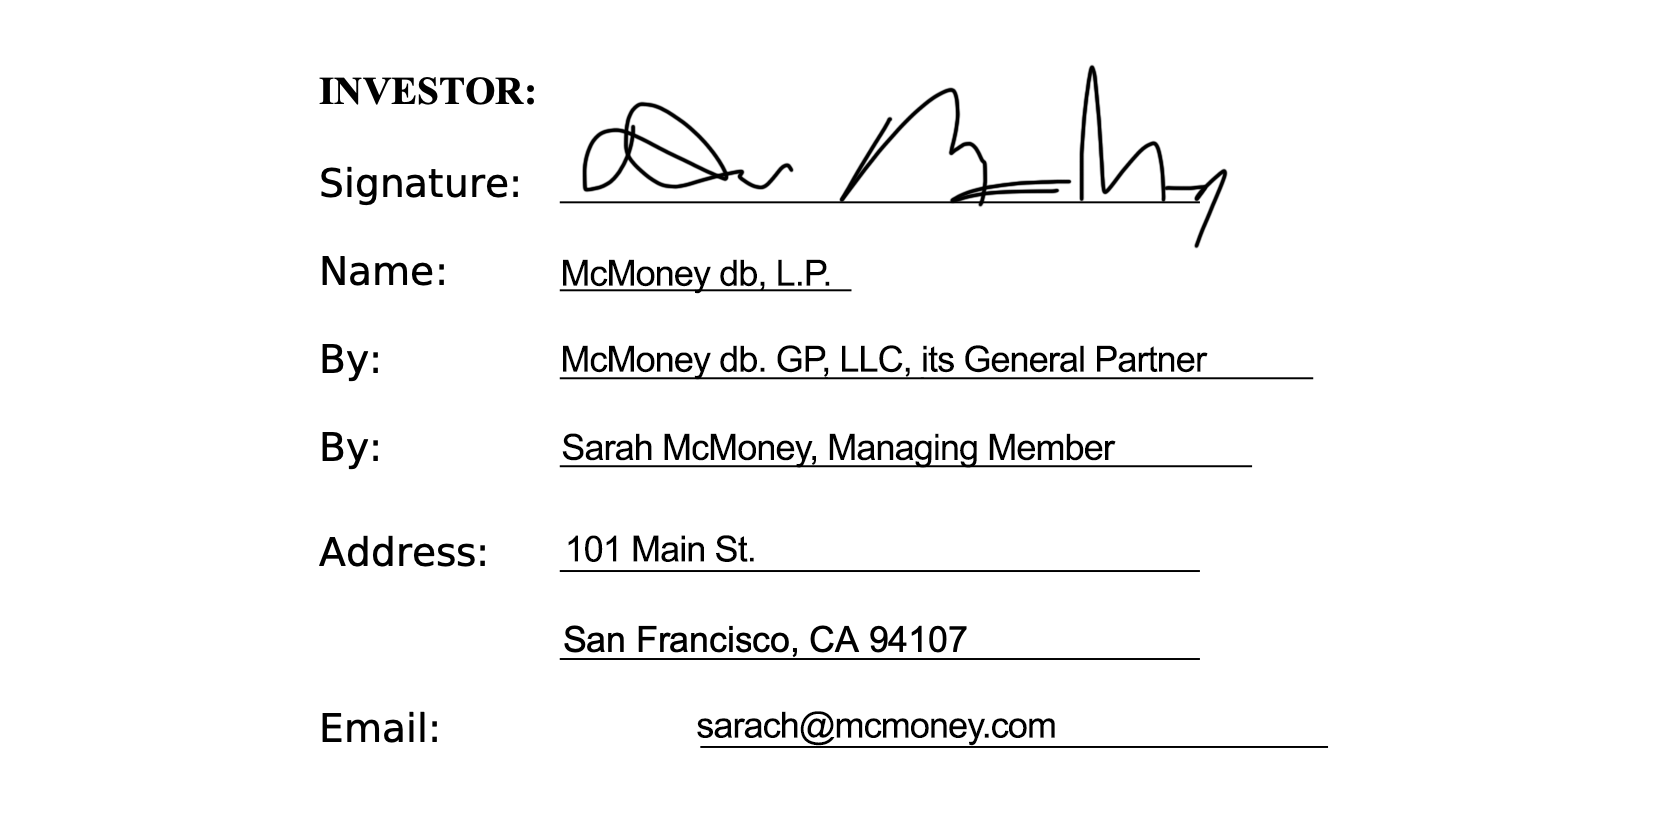 Example of an investor signature block in a term sheet